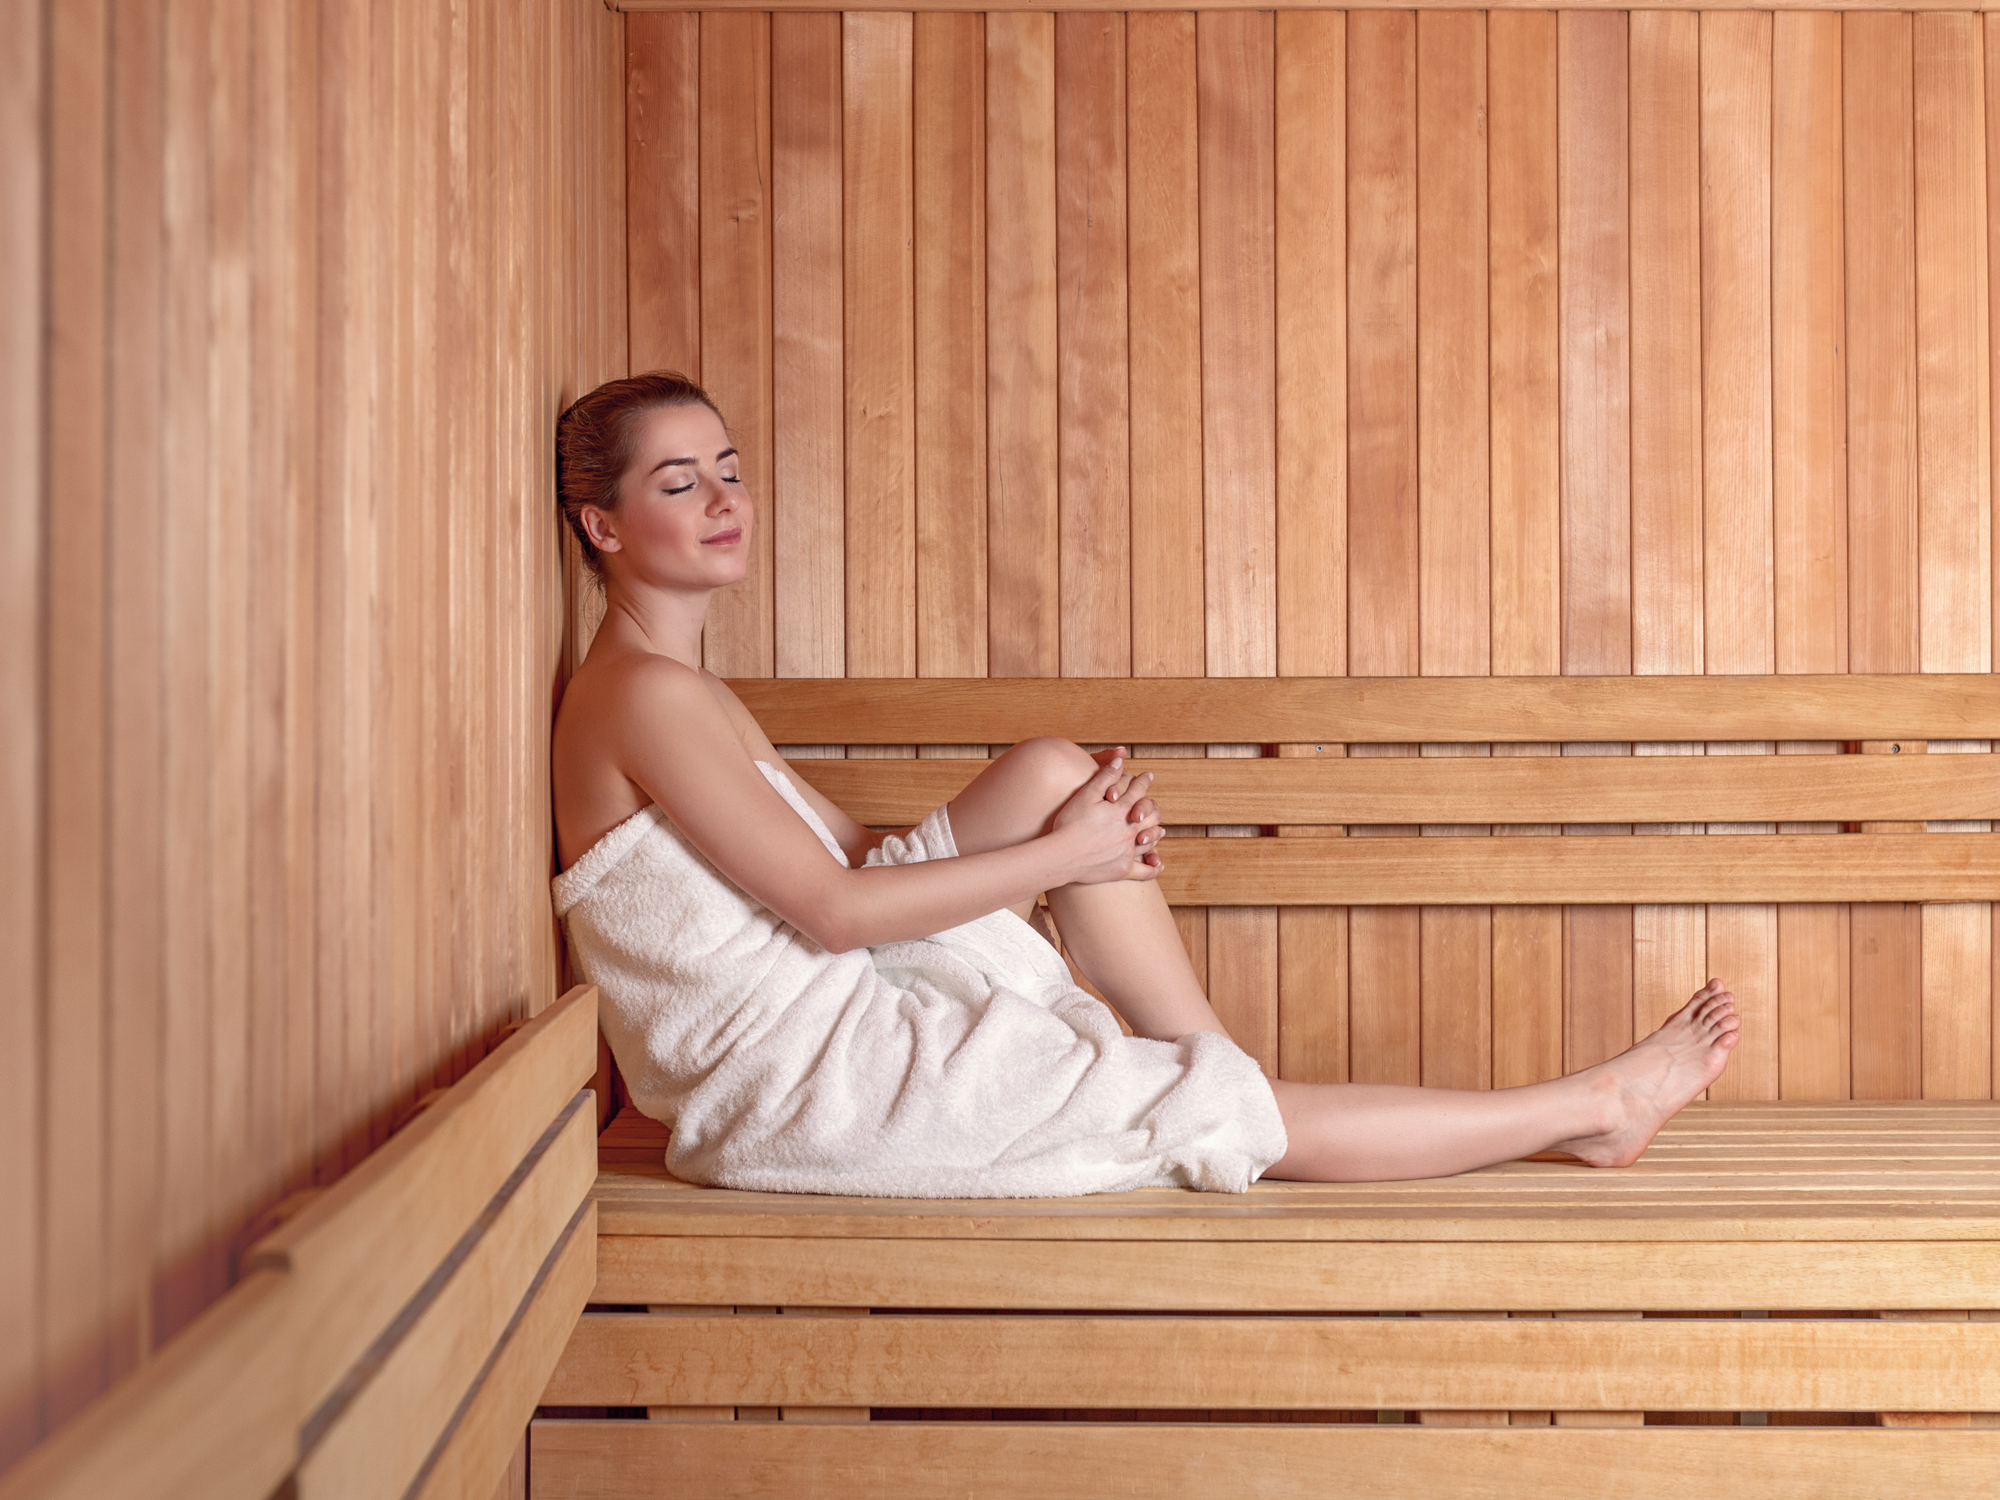 Dodge 4 diseases by sitting in a sauna